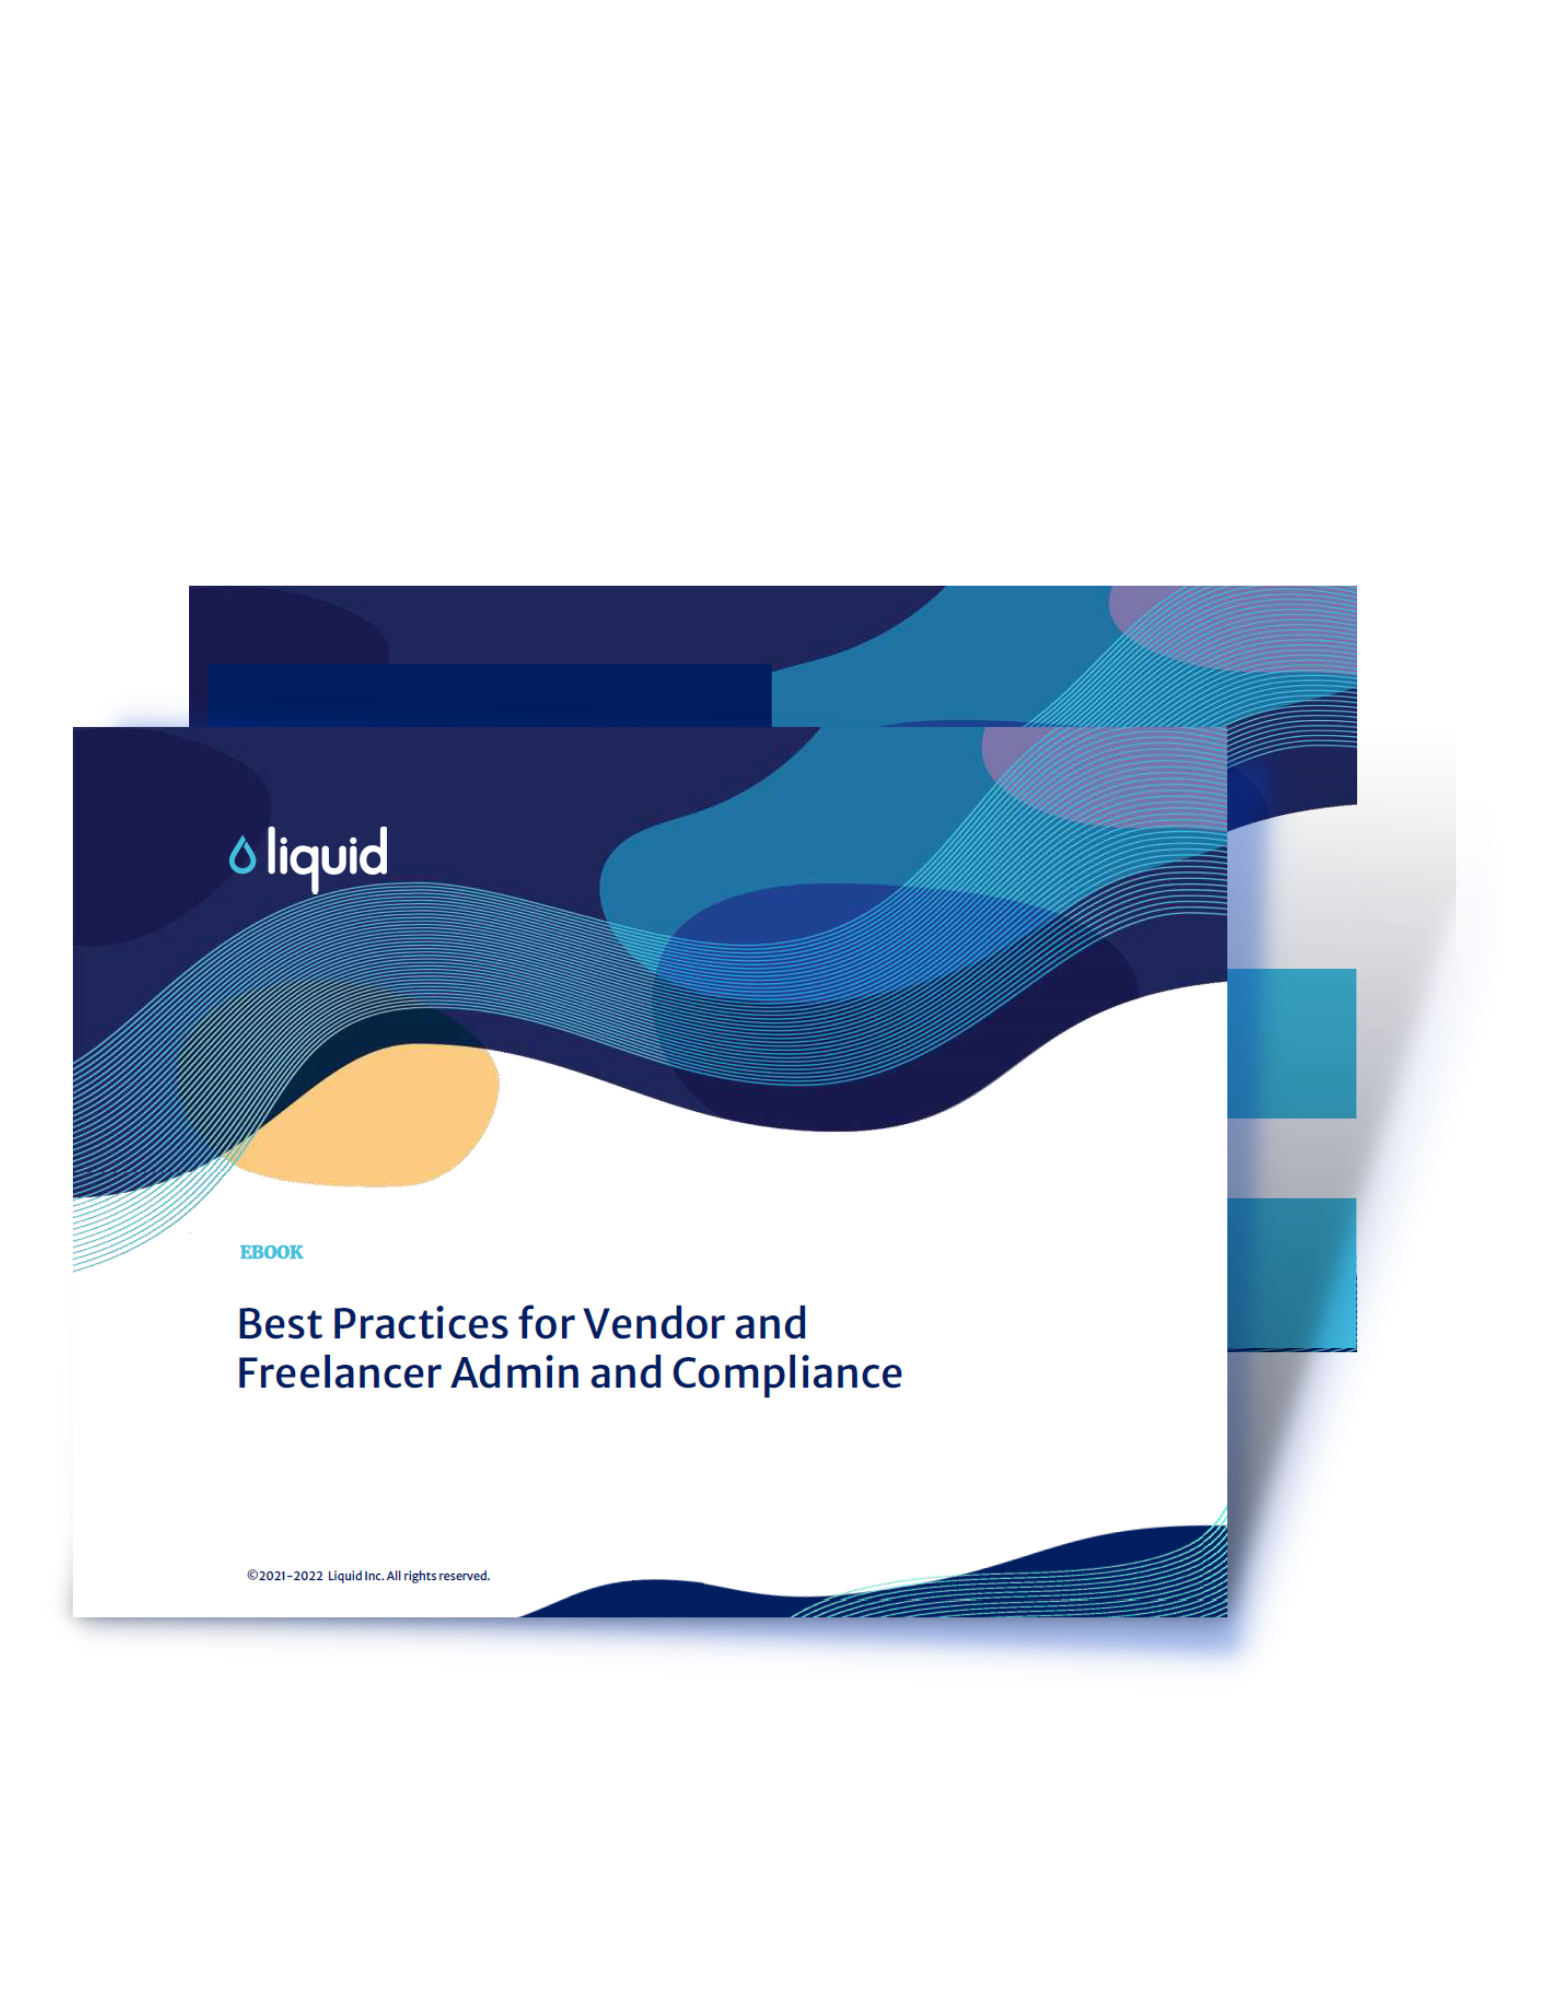 Best practices in vendor and freelancer admin and compliance